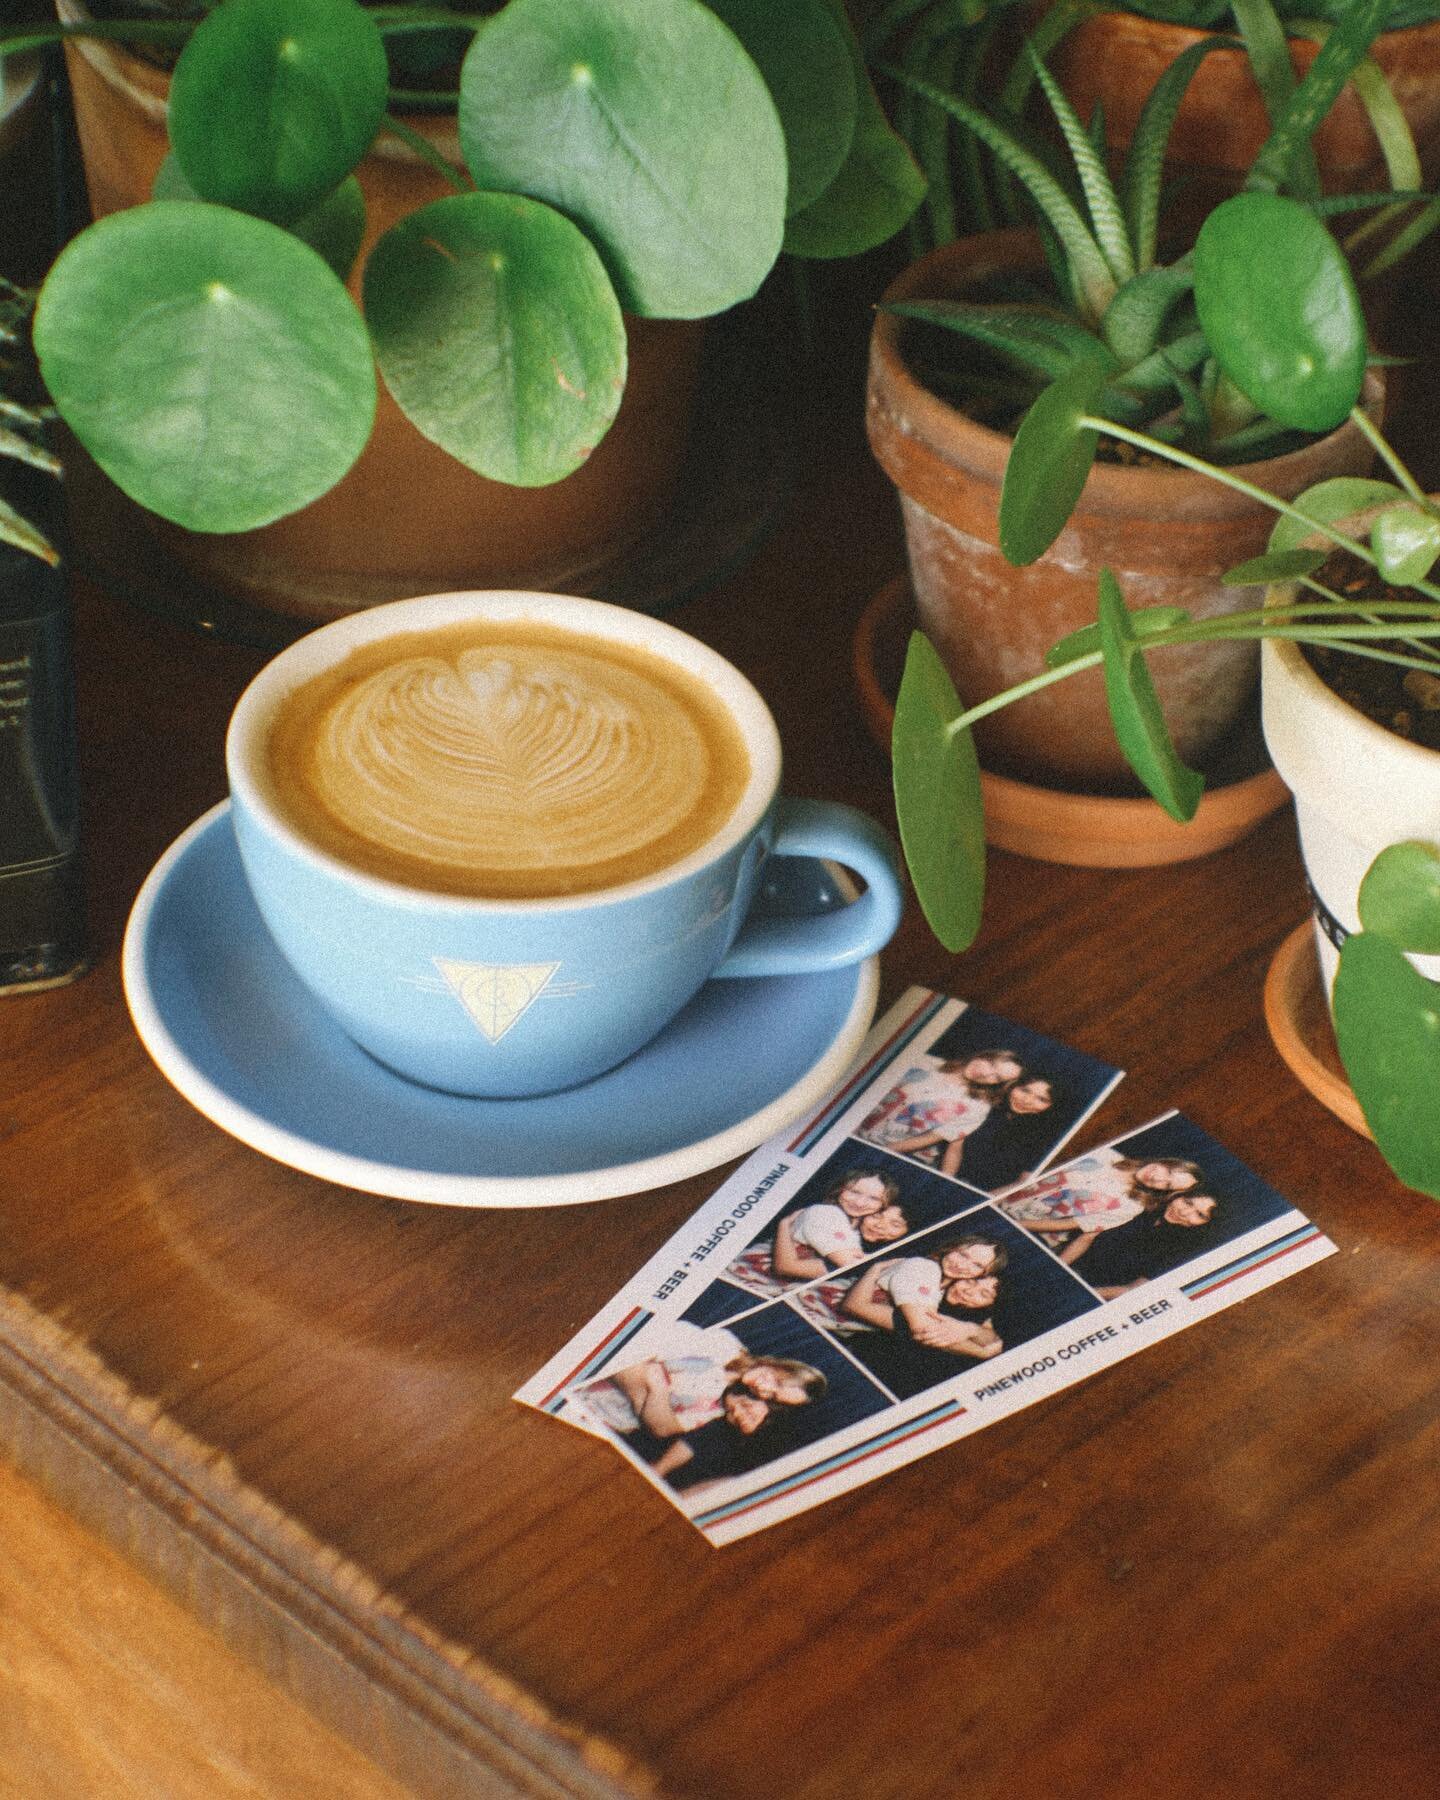 the makings of a memorable coffee date ✿